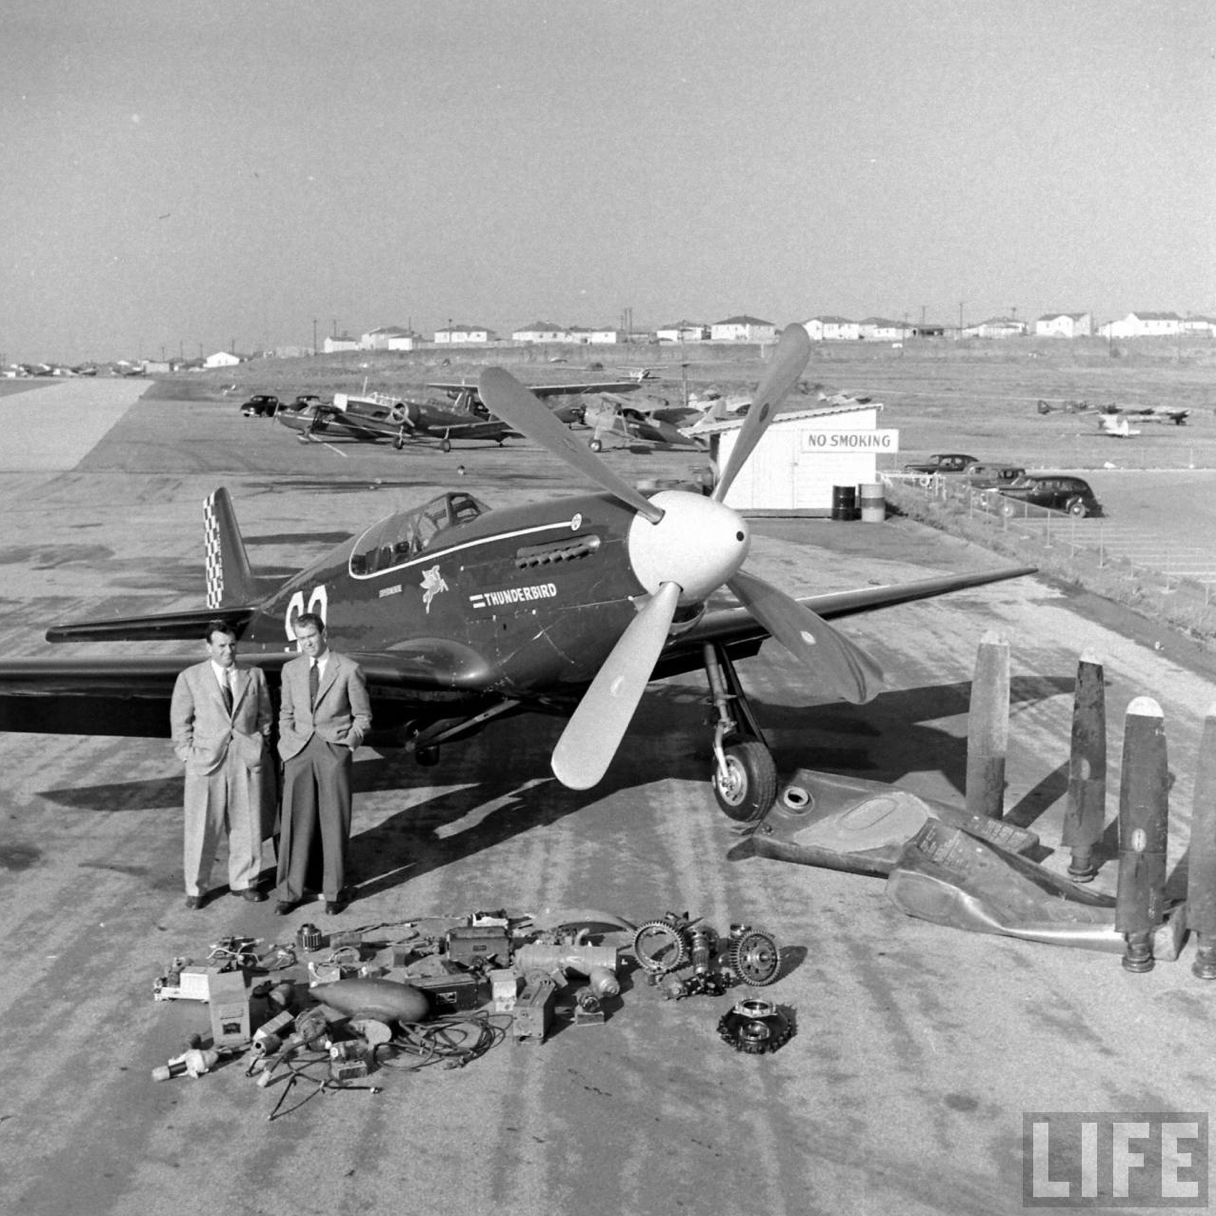 Joe De Bona and Jimmy Stewart with Thunderbird, their P-51C Mustang racer, April 1949. Placed on the ramp in front of the airplane is equipment that has been removed or replaced. Note the four "cuffed" Hamilton Standard propeller blades along the right side of the photograph. They have been replaced with un-cuffed and polished Hamilton Standard blades. (Allan Grant/LIFE Magazine)